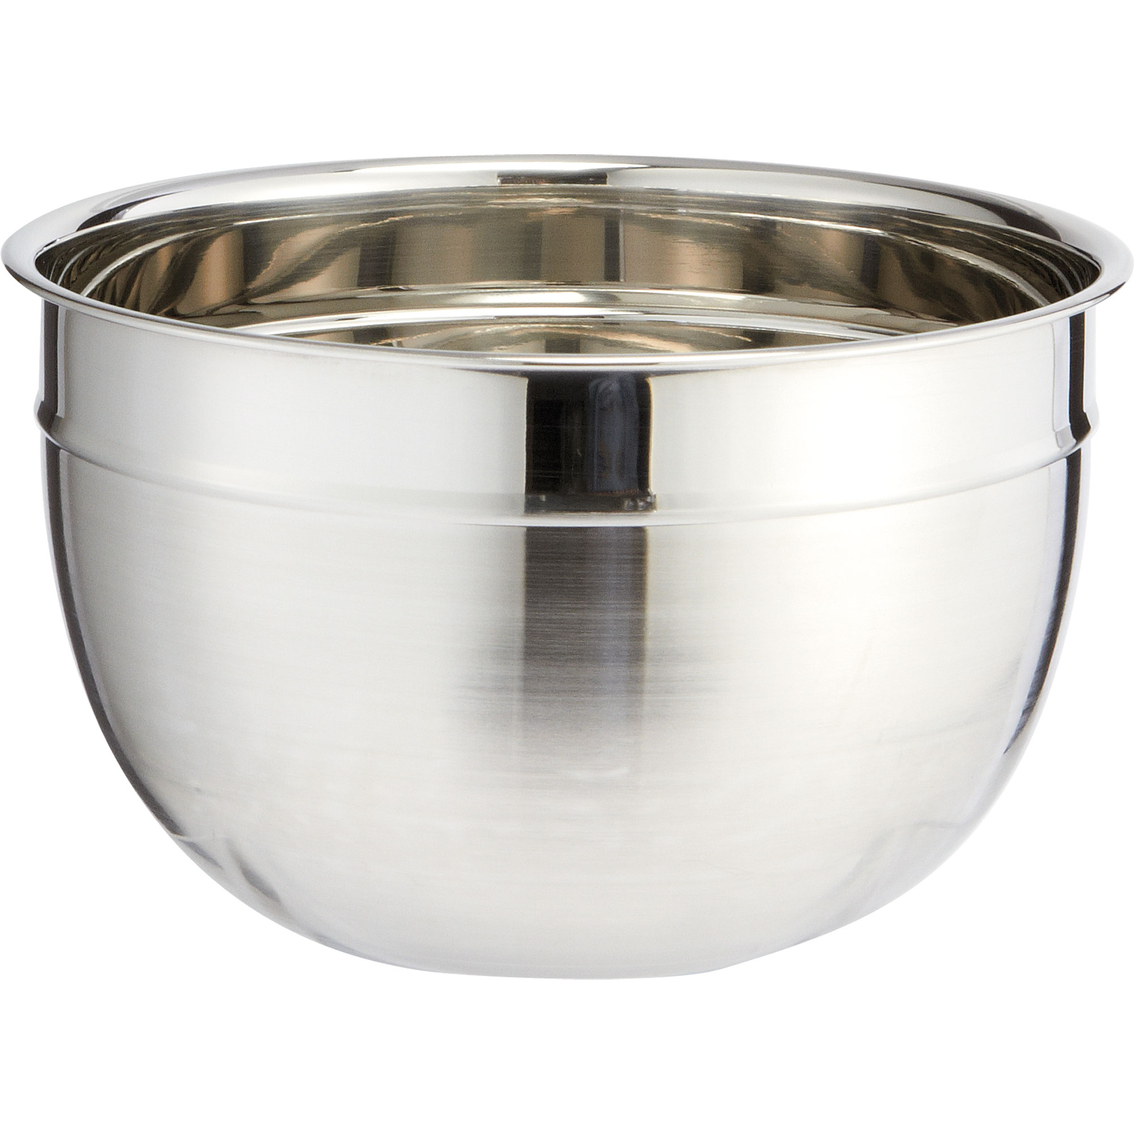 Simply Perfect 3 pc. Mixing Bowl Set - Image 4 of 4